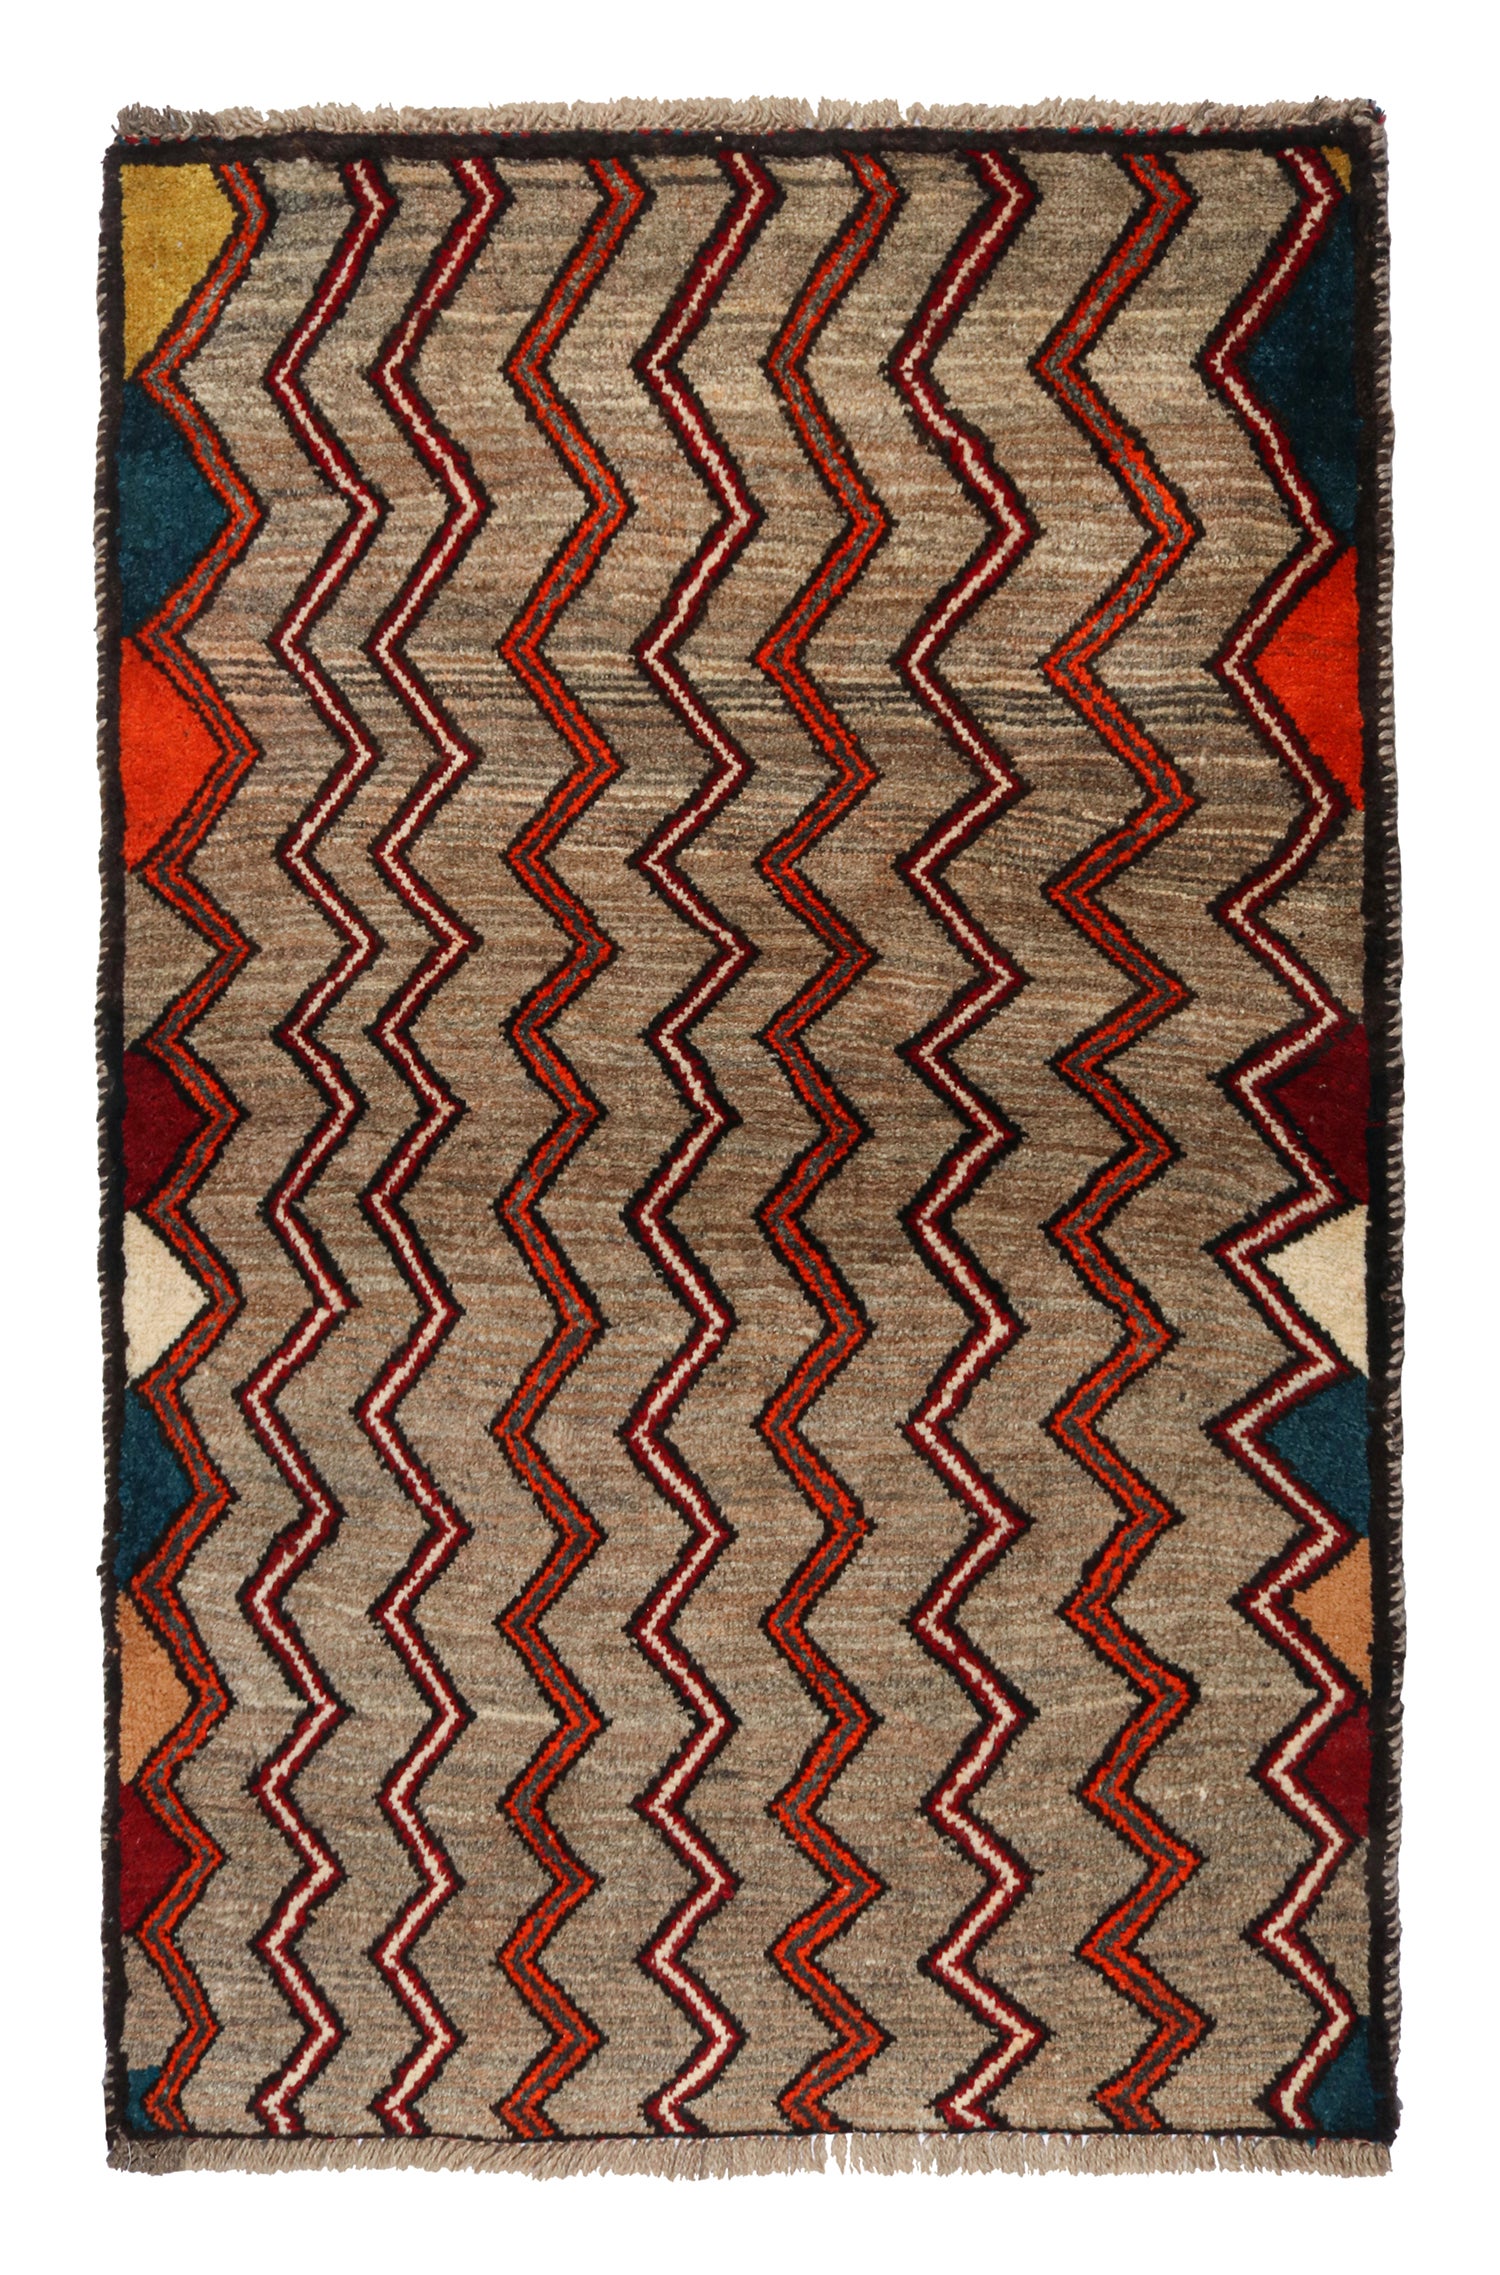 Vintage Gabbeh Tribal Rug in Beige-Brown and Red Chevron Patterns by Rug & Kilim For Sale